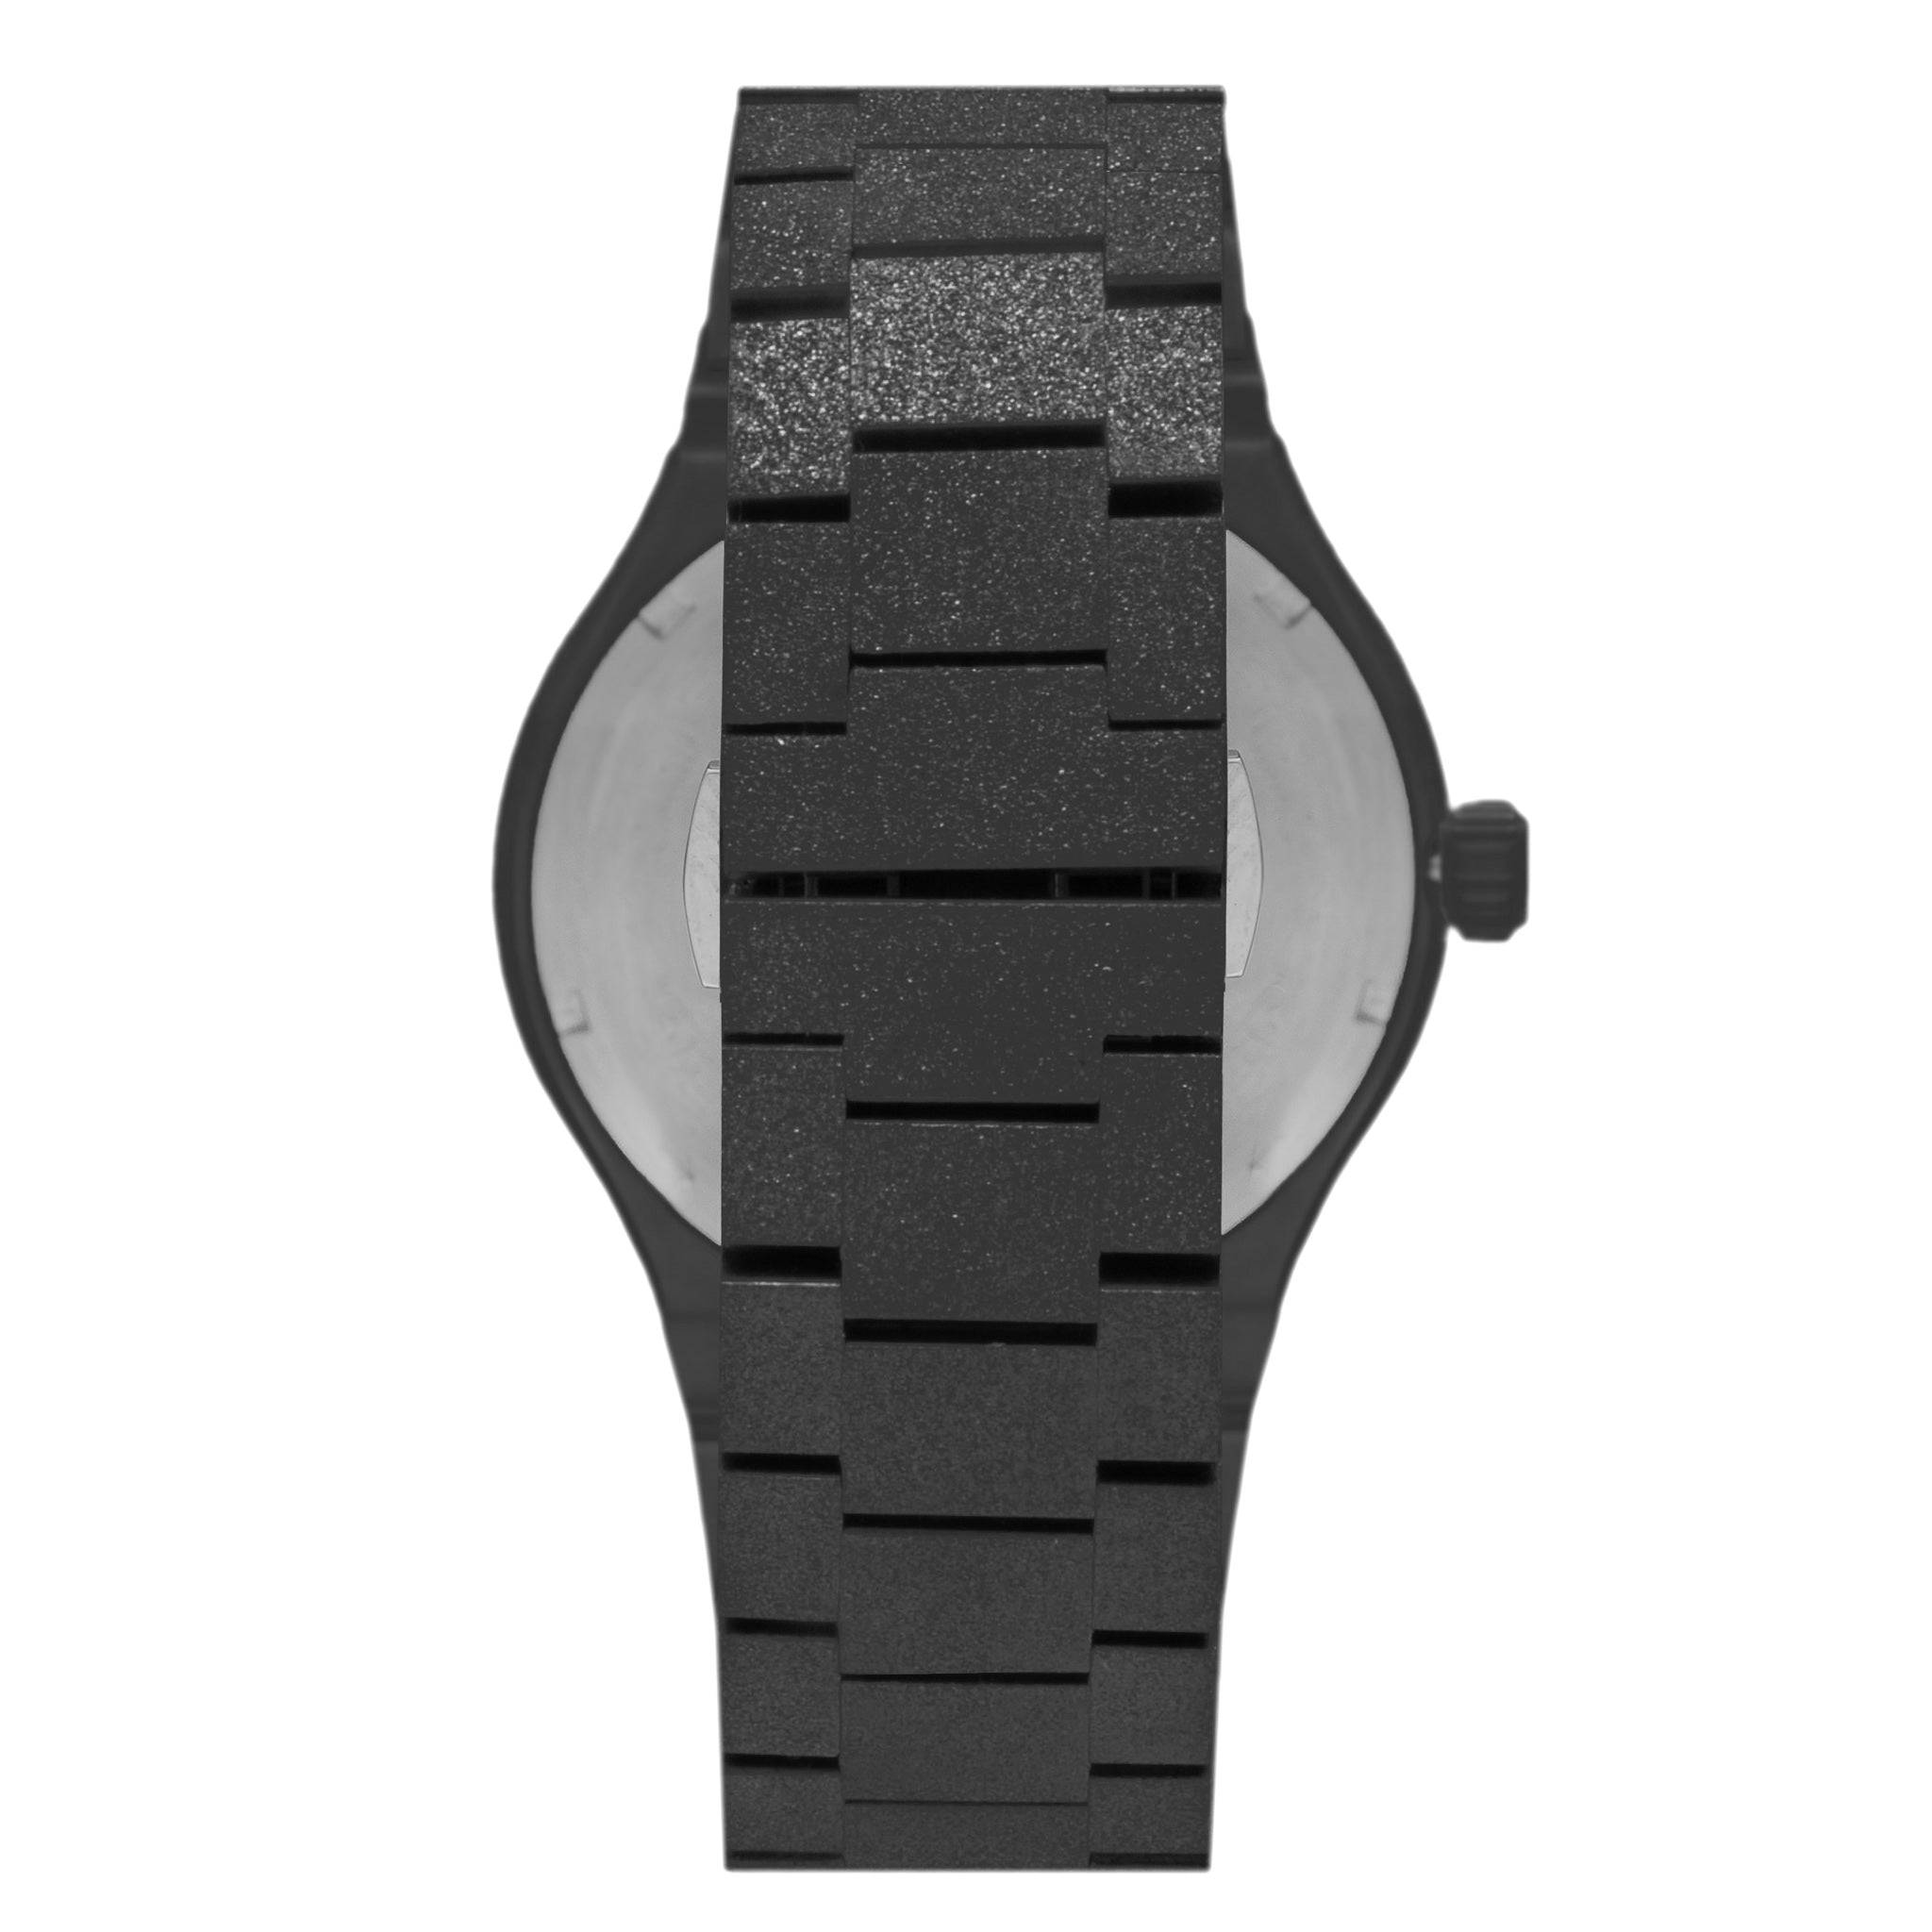 Stardust watches back black watches for men